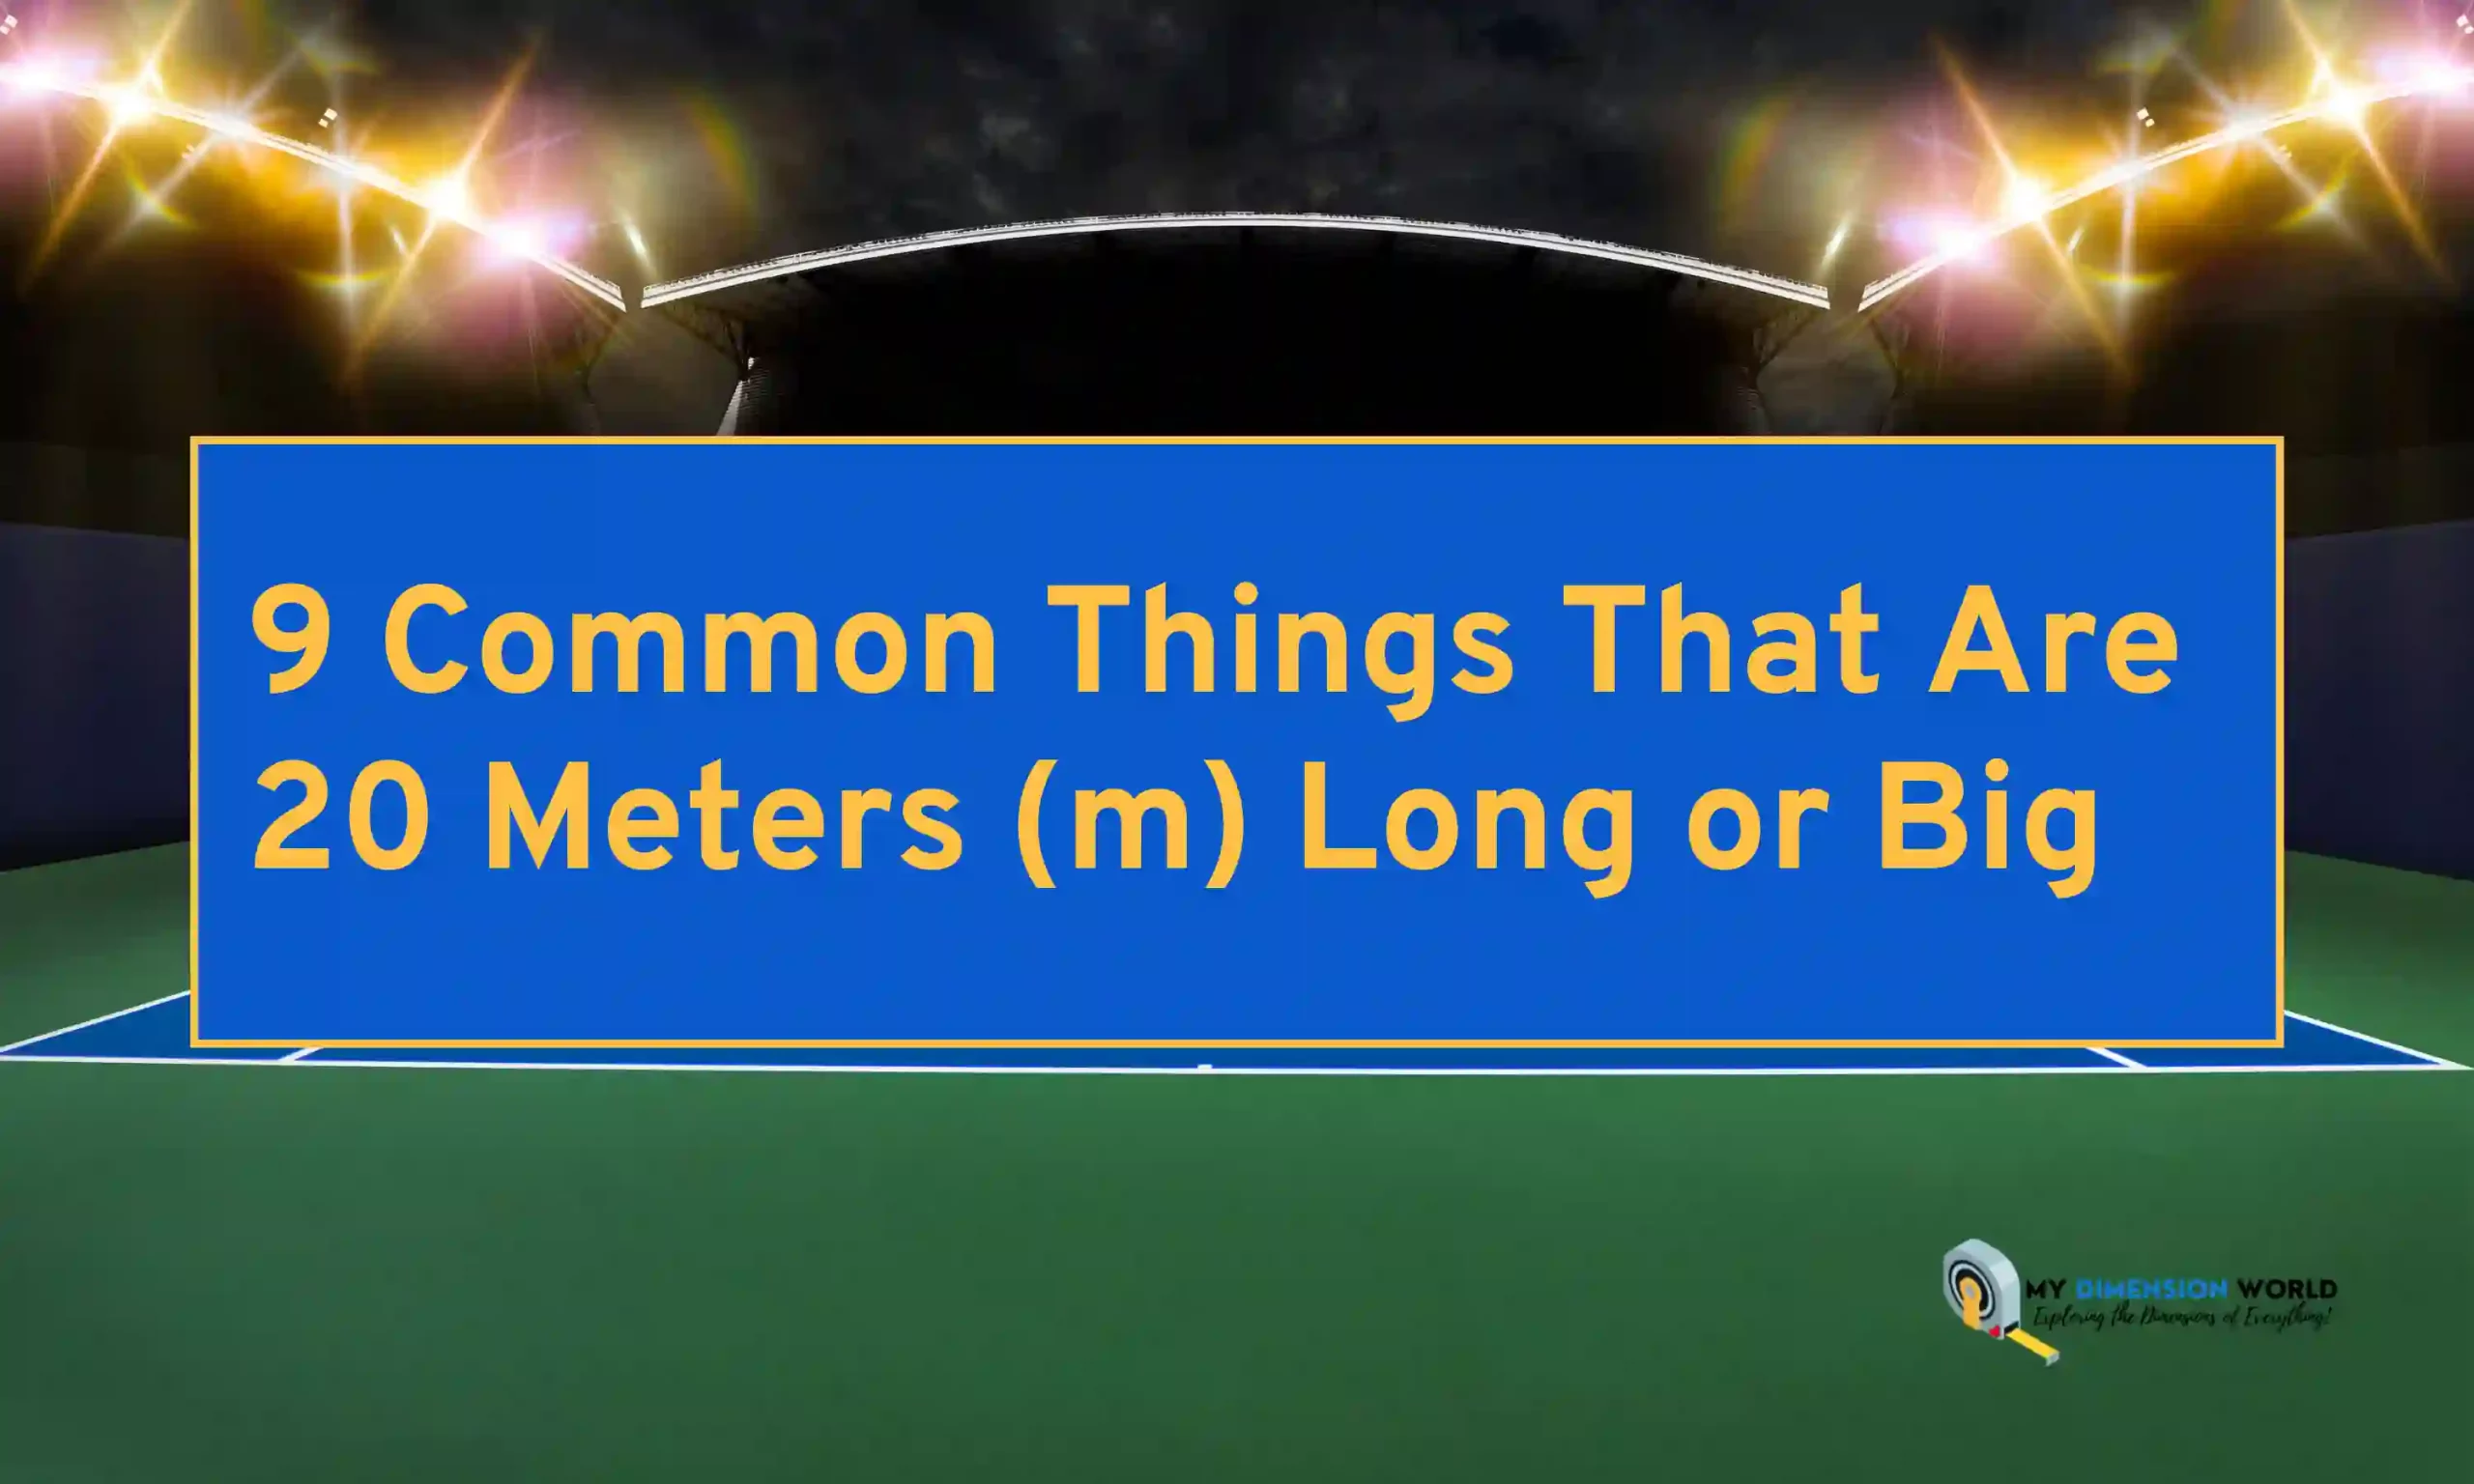 9 Common Things That Are 20 Meters (m) Long or Big